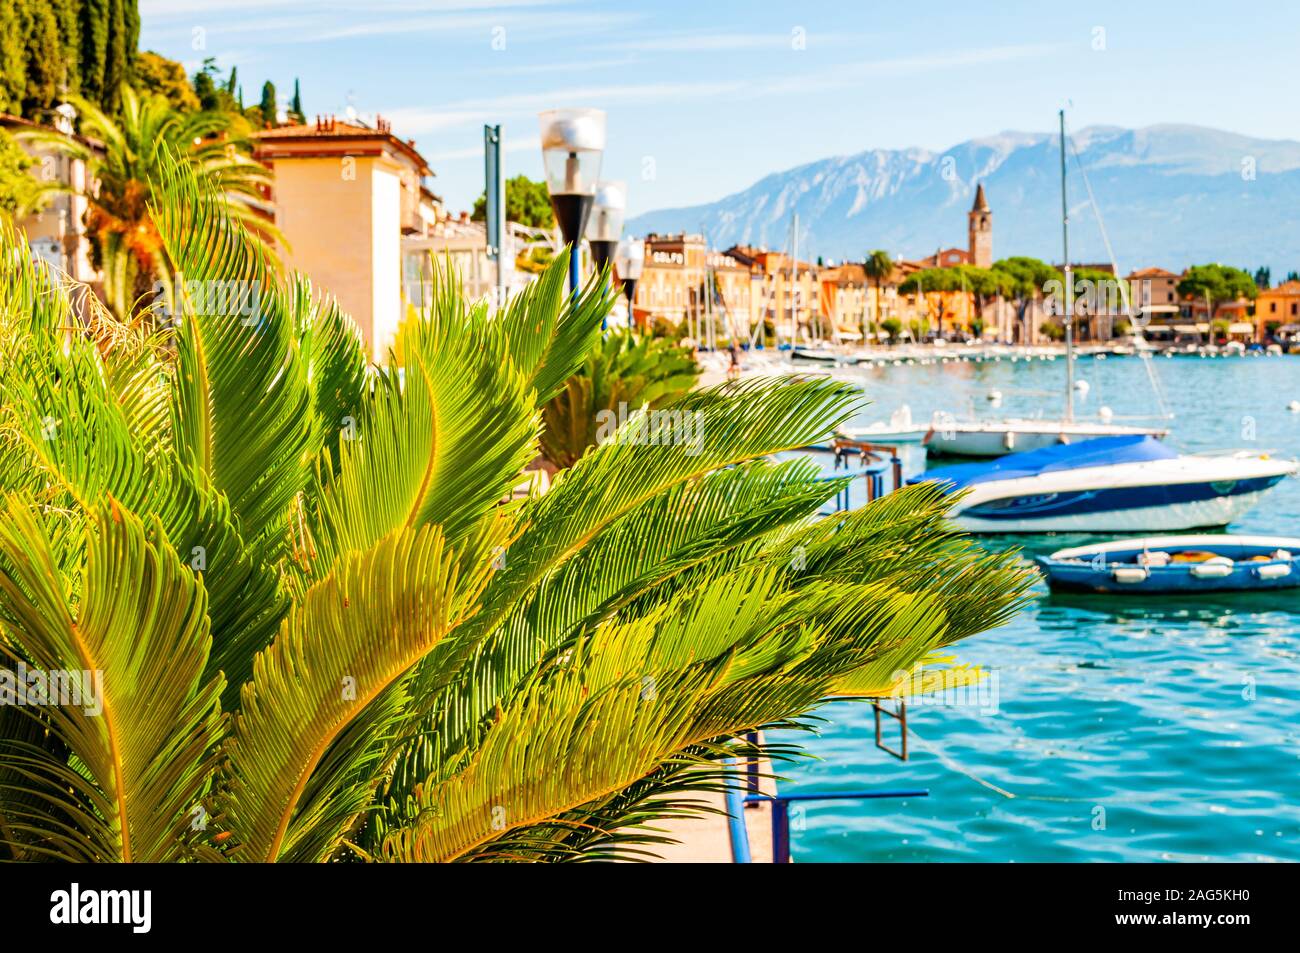 Garda lake western shore, Lombardy Italy. View on medieval Toscolano Maderno cityscape through palm leaves growing on promenade and piers with parked Stock Photo